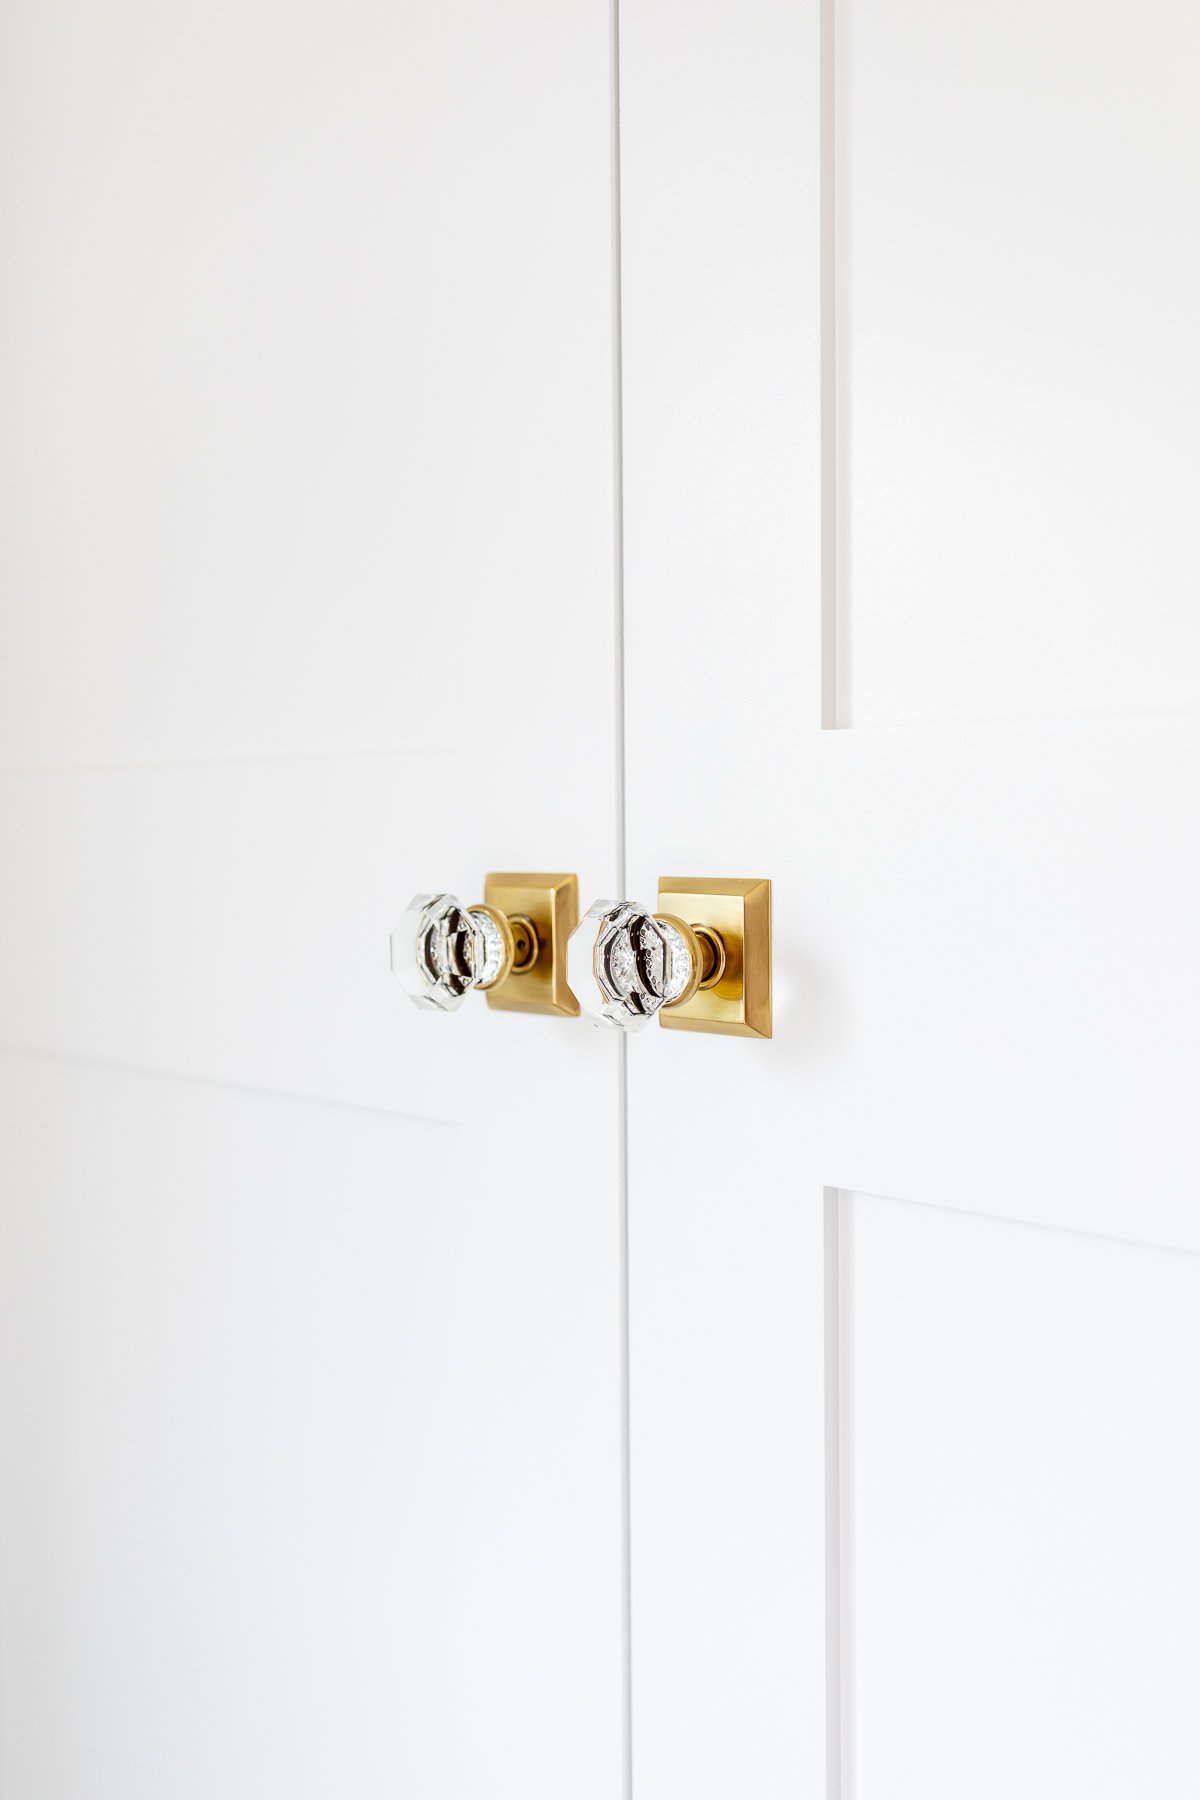 A close up of a white closet door with brass handles, showcasing a beautiful home improvement.